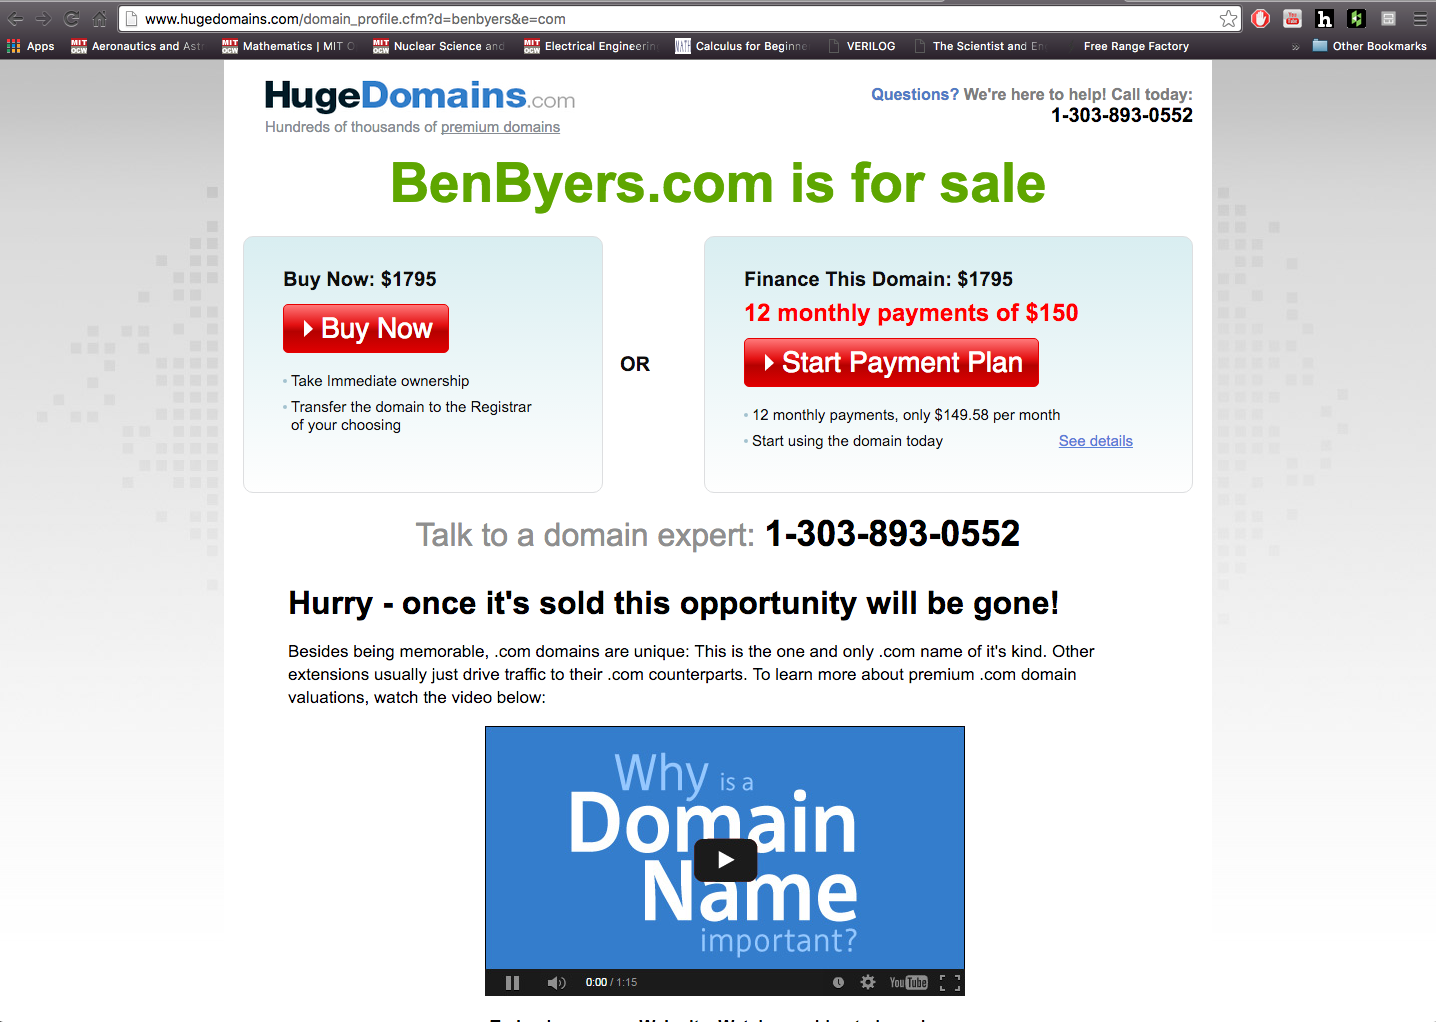 When you enter benbyers.com into the URL bar, the website redirects to this page. 